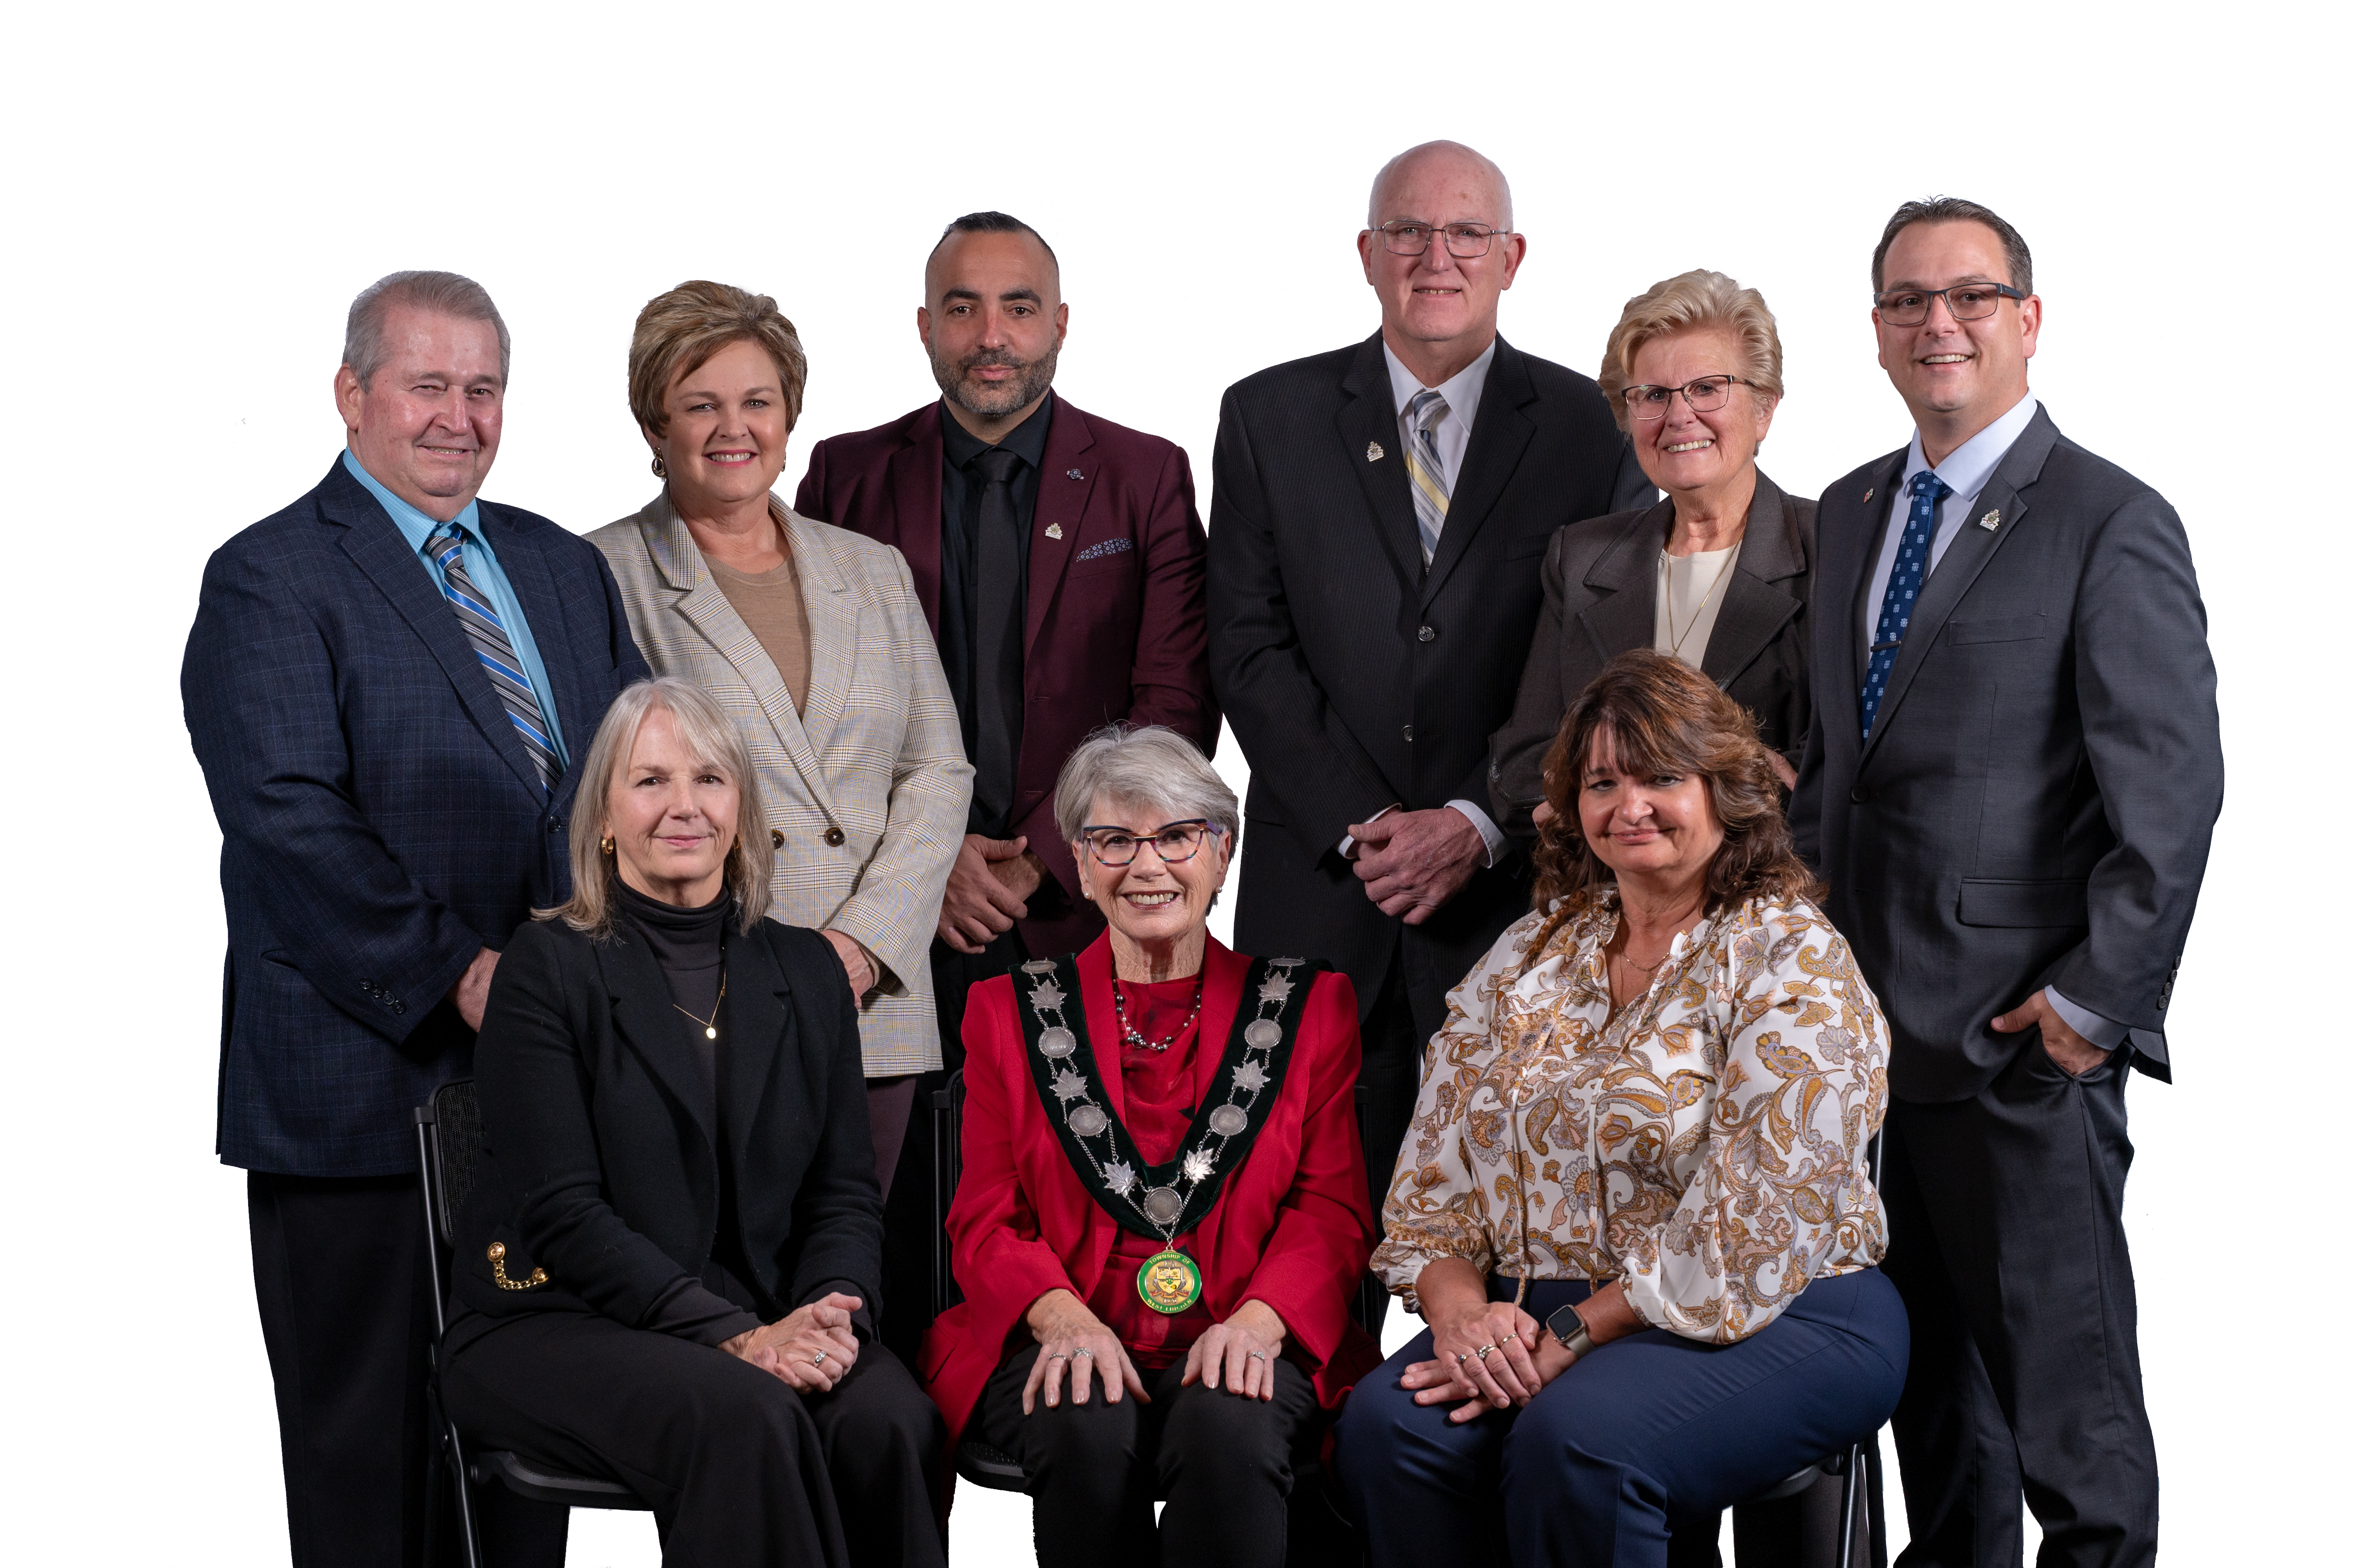 View our Mayor and Council page